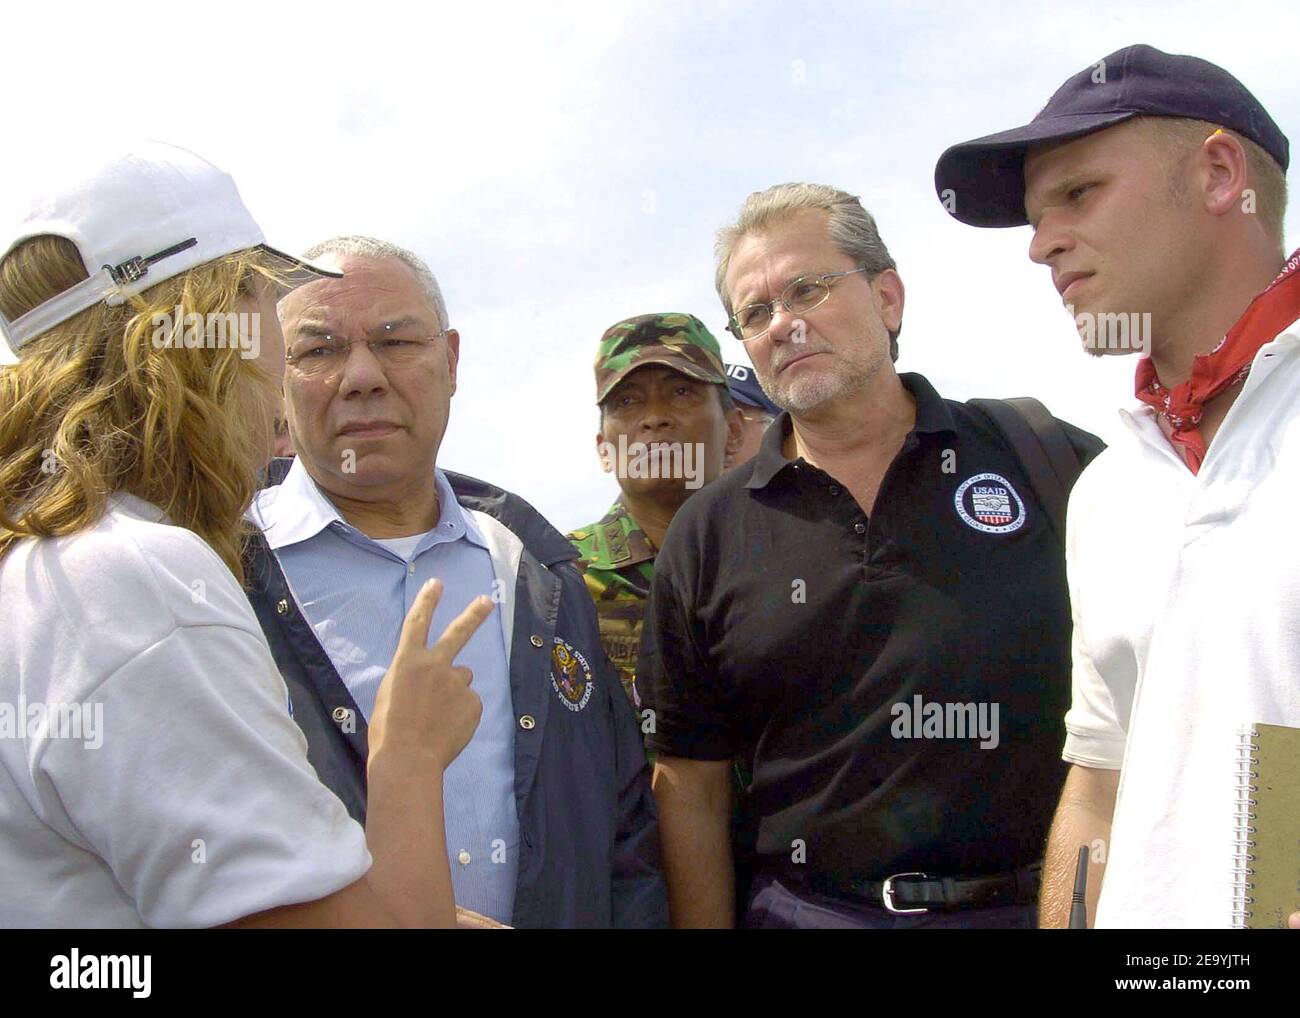 Secretary of State Colin Powell talks with relief aid workers during a tour of the Banda Ache, Sumatra, Indonesia airport. Medical teams from USS Abraham Lincoln (CVN 72), Carrier Air Wing Two (CVW-2) and the International Organization for Migration (IOM) set-up a triage site located on Sultan Iskandar Muda Air Force Base, in Banda Aceh, Sumatra. The two teams worked together with members of the Australian Air Force to provide initial medical care to victims of the Tsunami-stricken coastal regions. Photo by Seth C. Peterson/USN via ABACA. Stock Photo